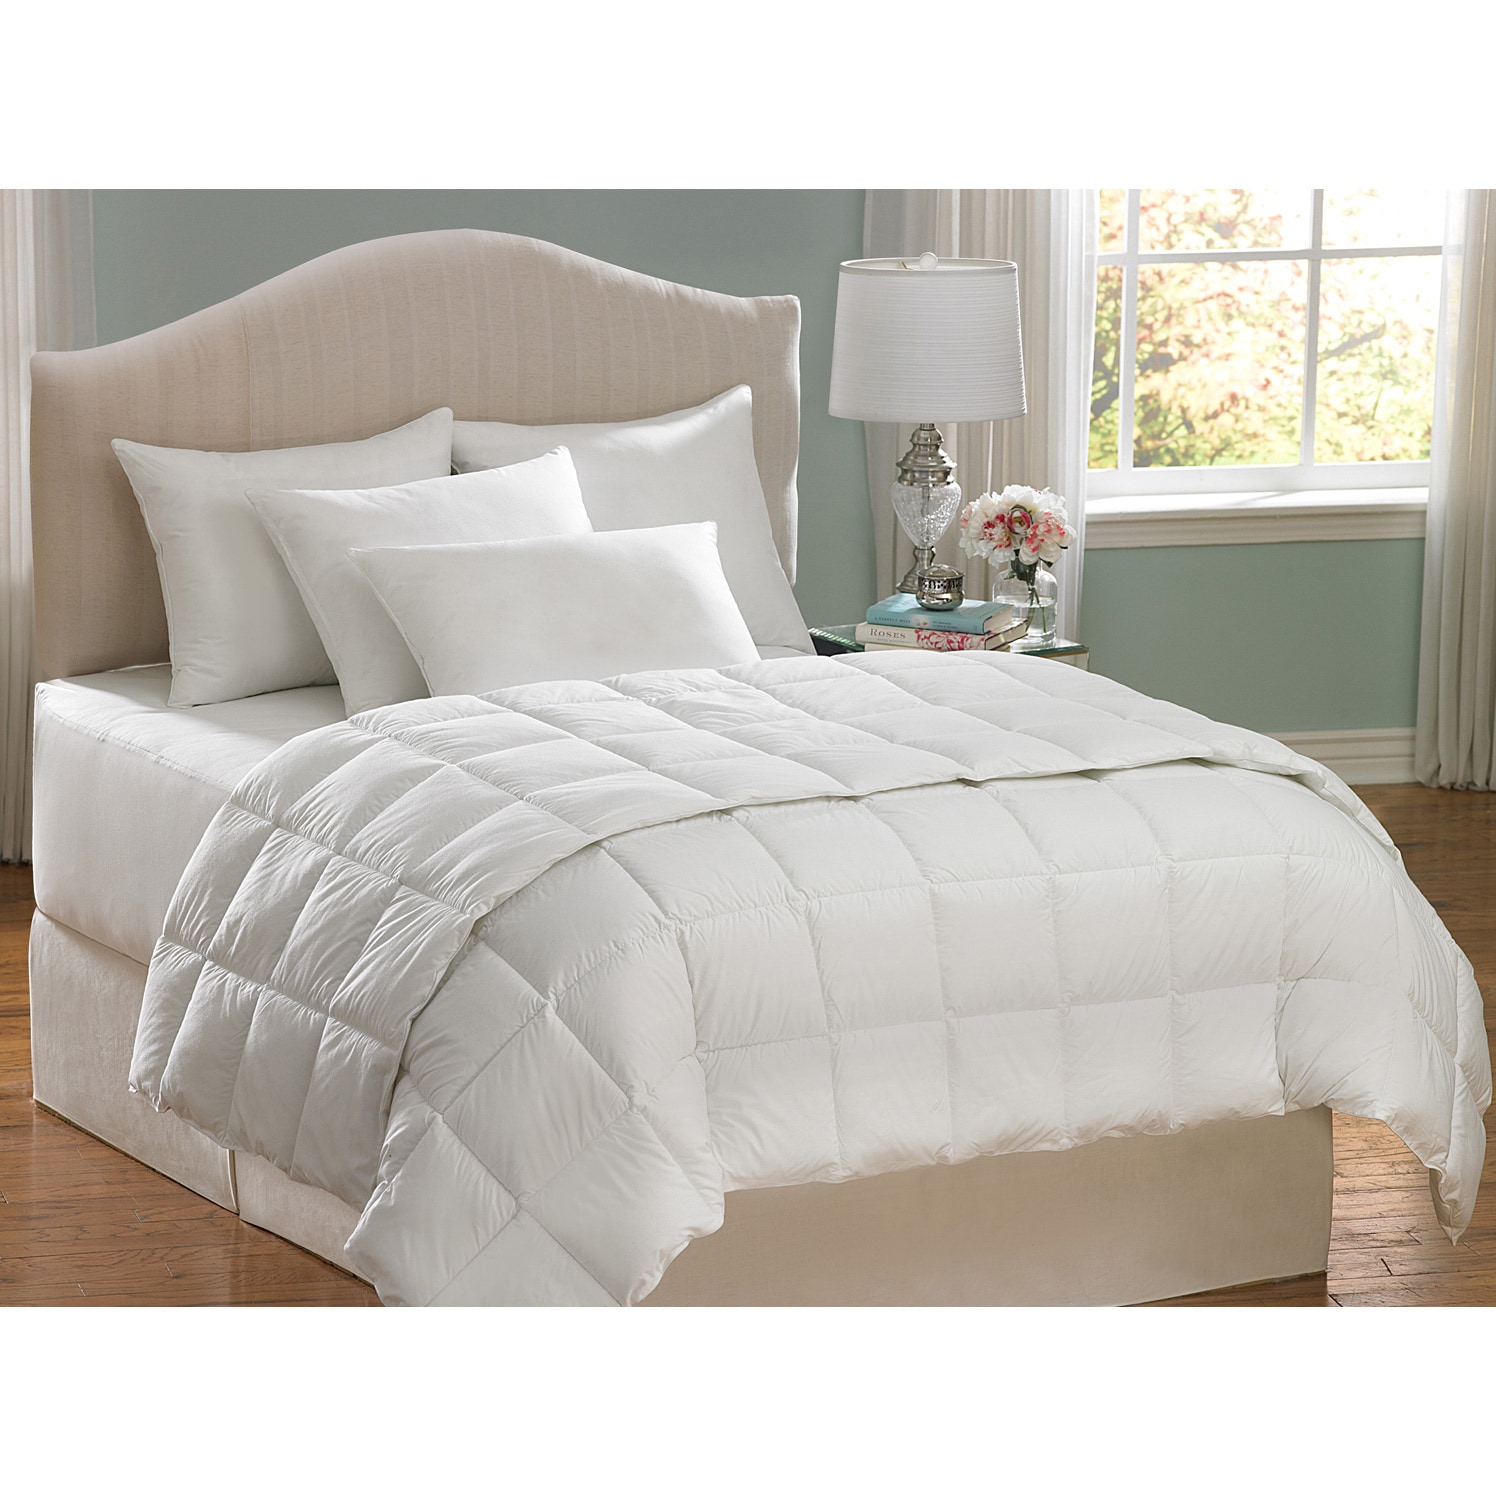 Shop Allerease Hot Water Washable Allergy Protection Comforter